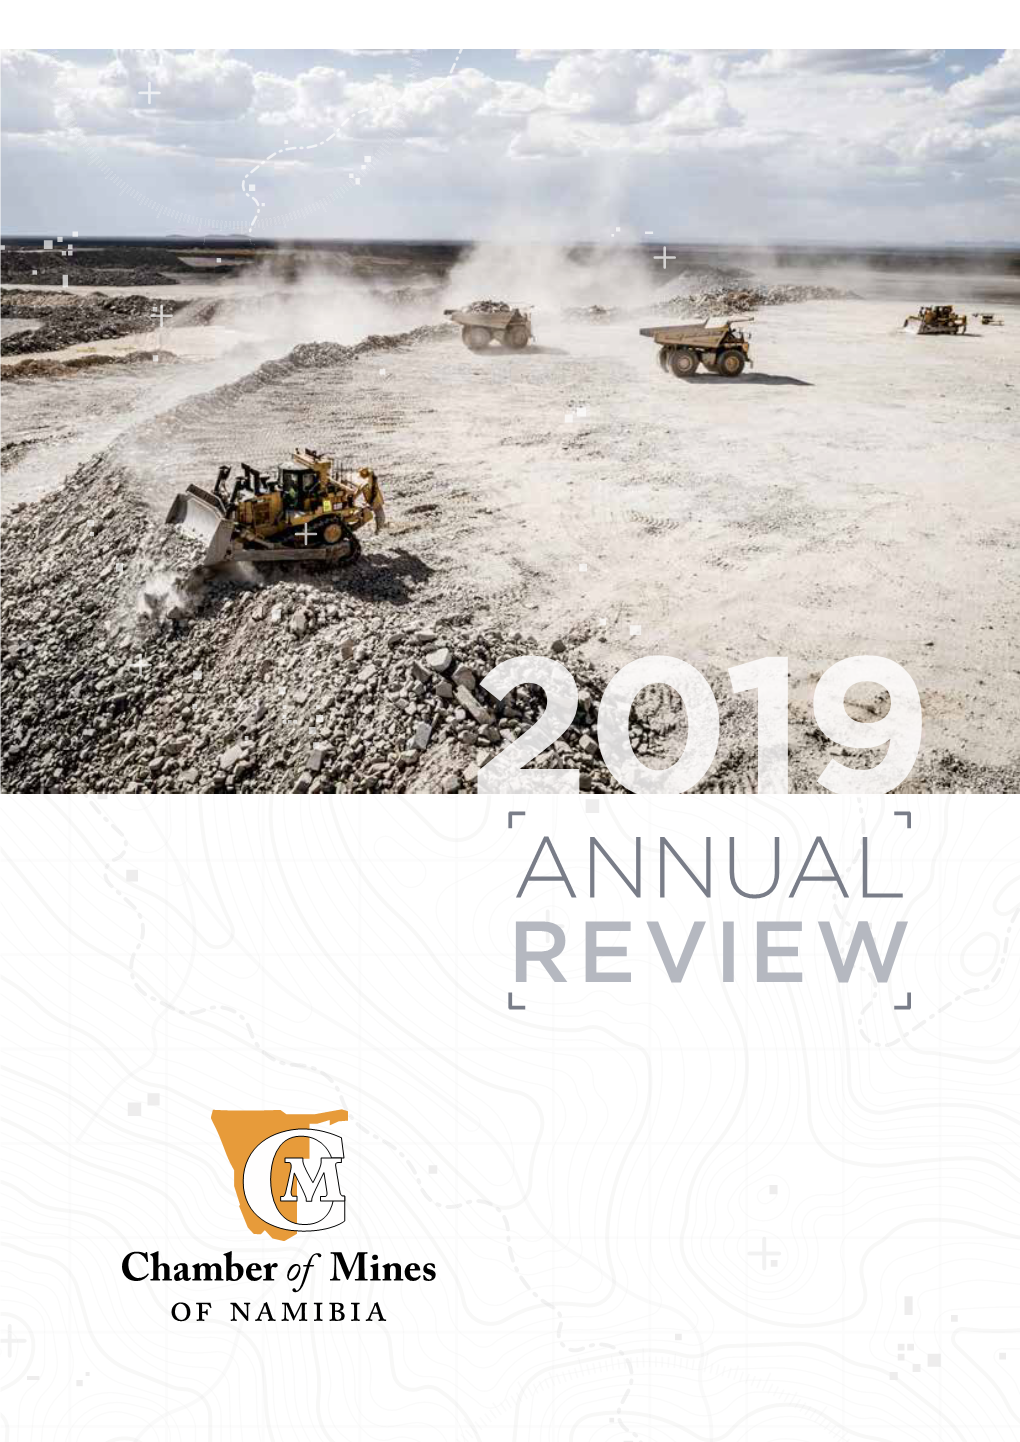 2019 Annual Review Our Vision, Mission & Values